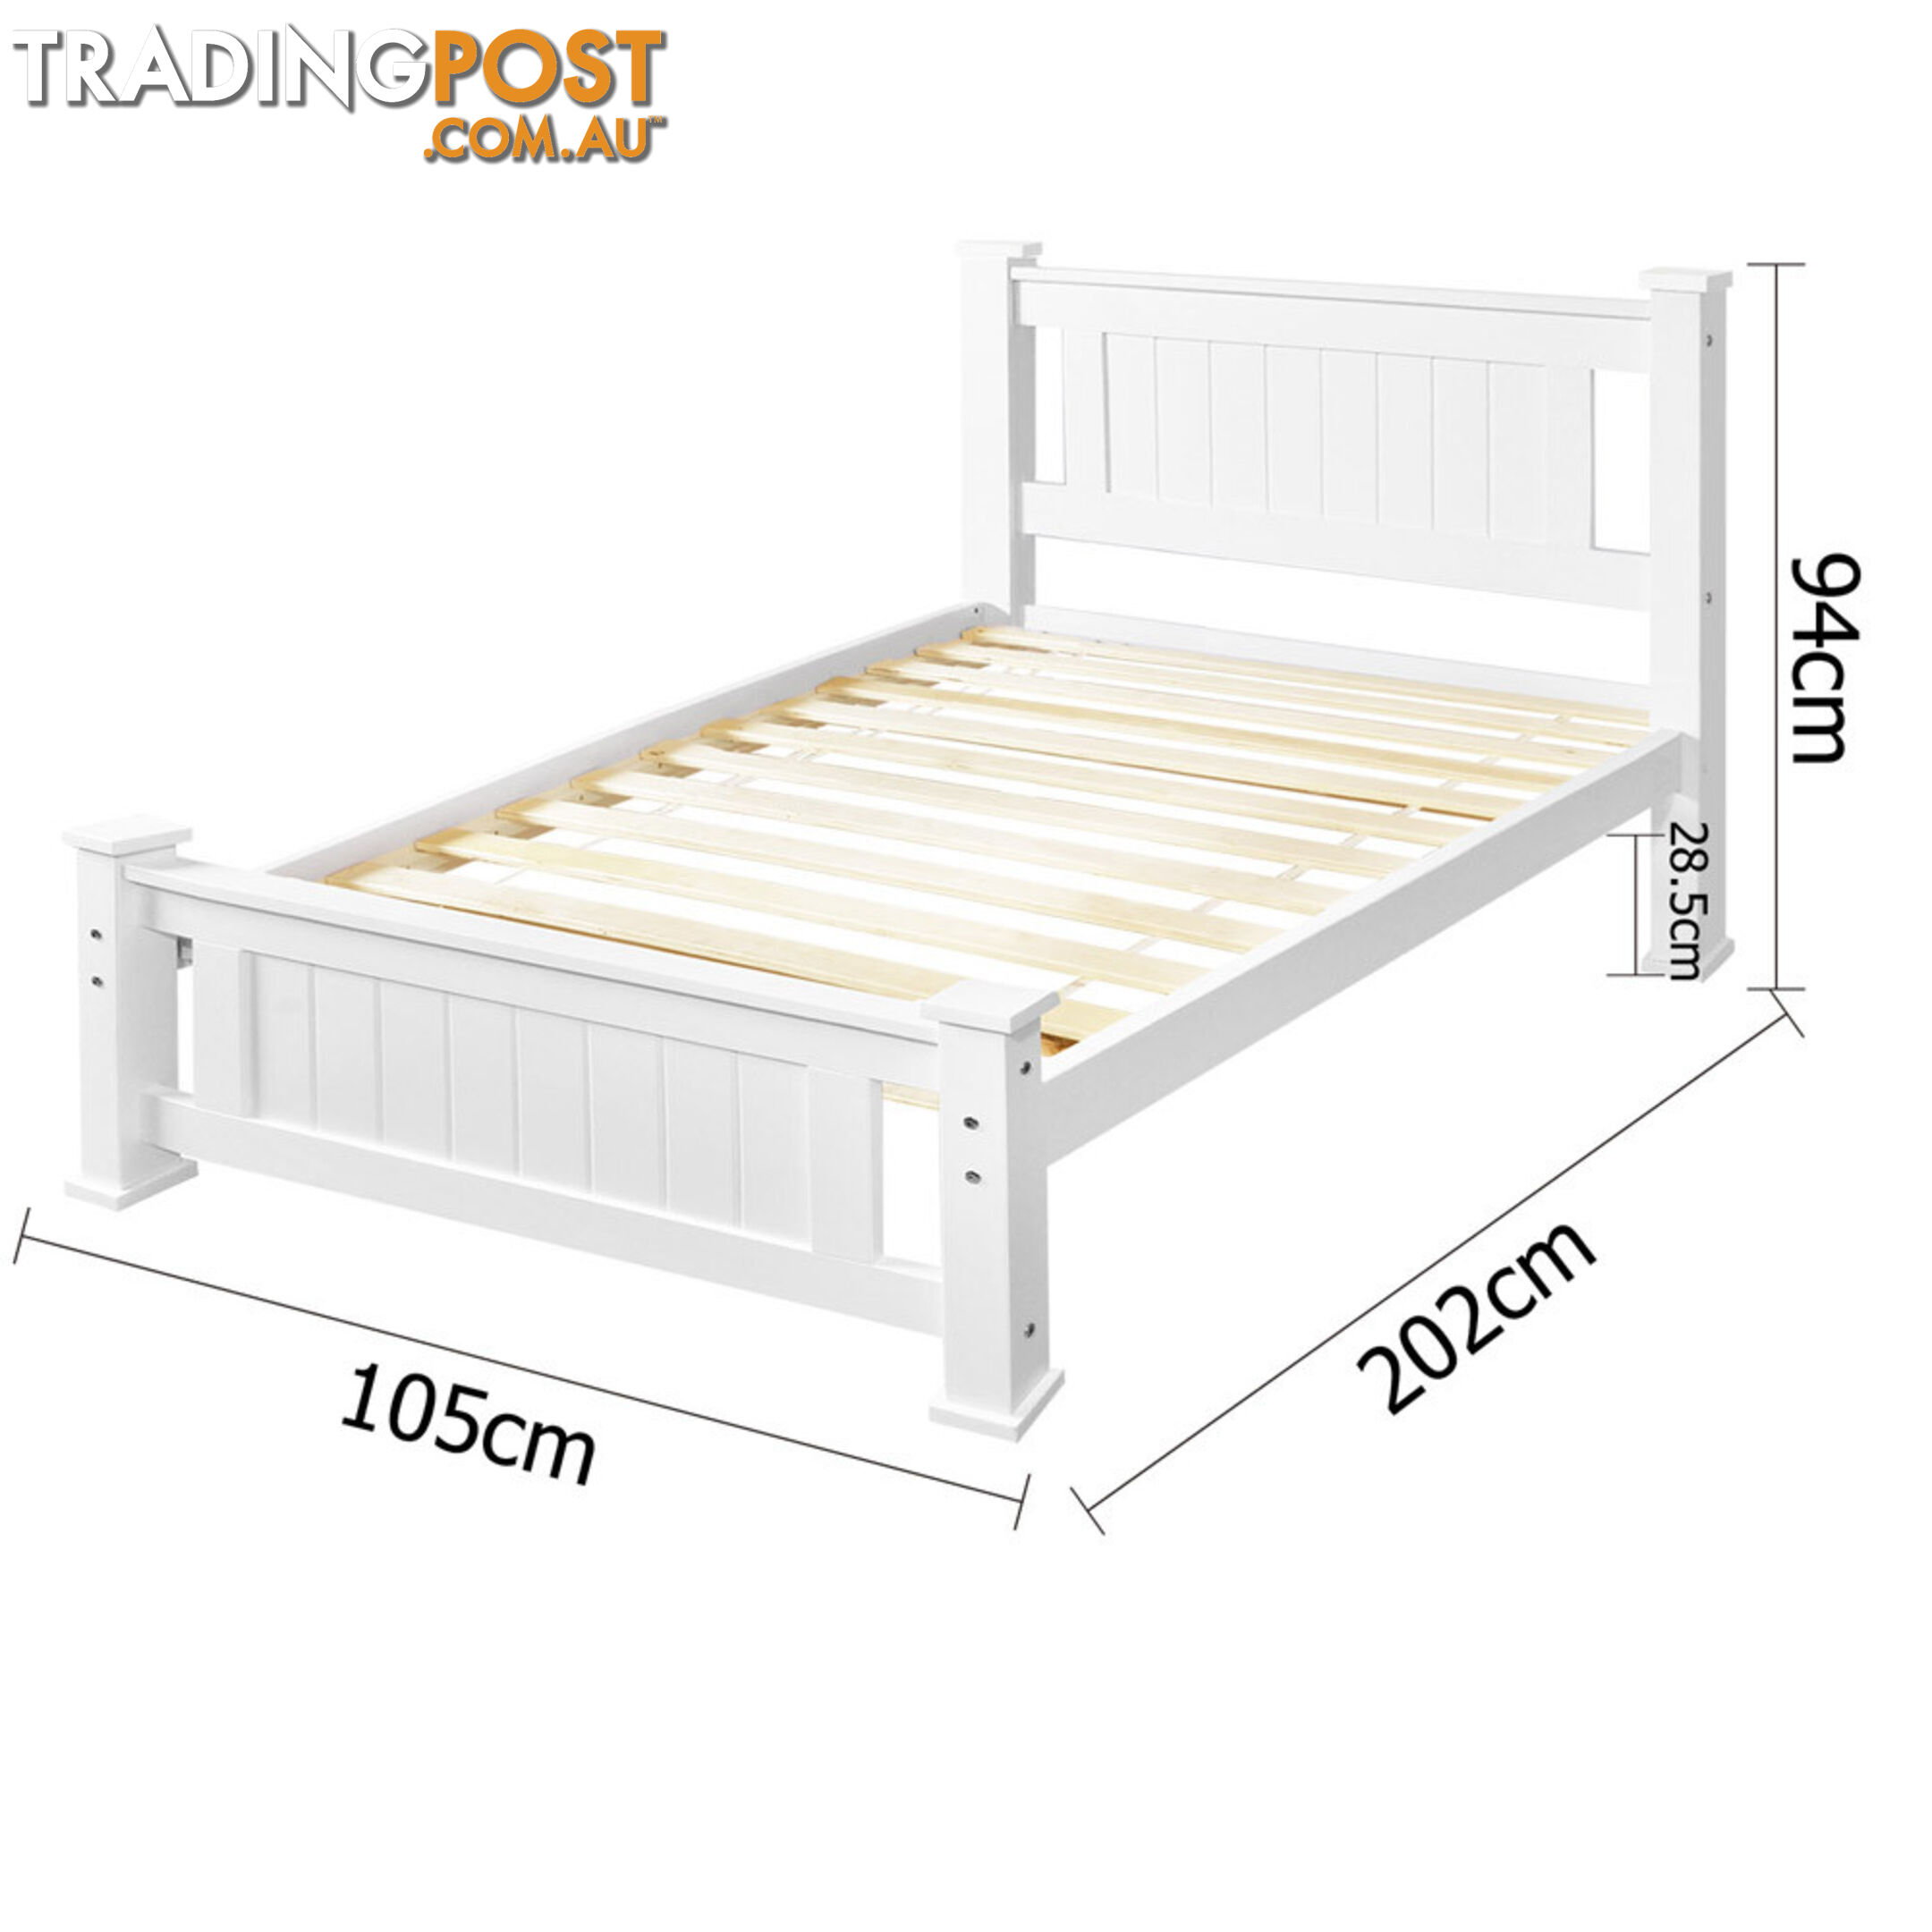 Wooden Bed Frame Pine Wood w/ Drawers Single White